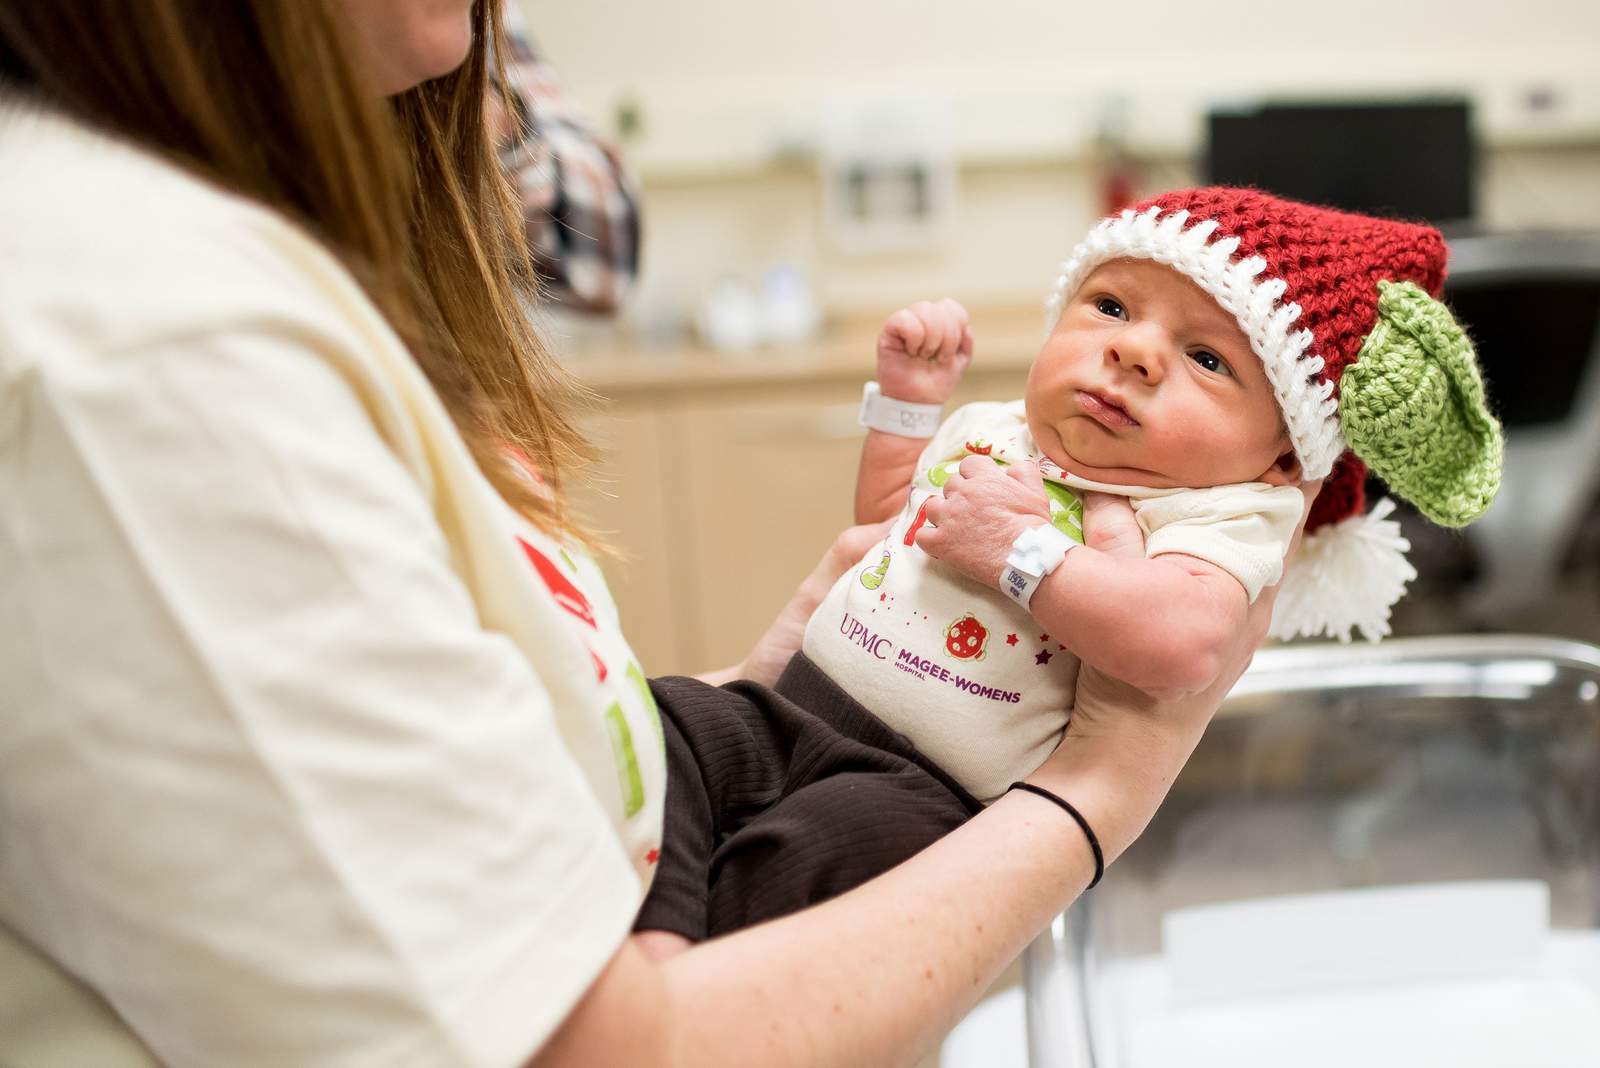 A Pittsburgh hospital dressed up newborns as festive Baby Yodas. And yes, the pictures are adorable